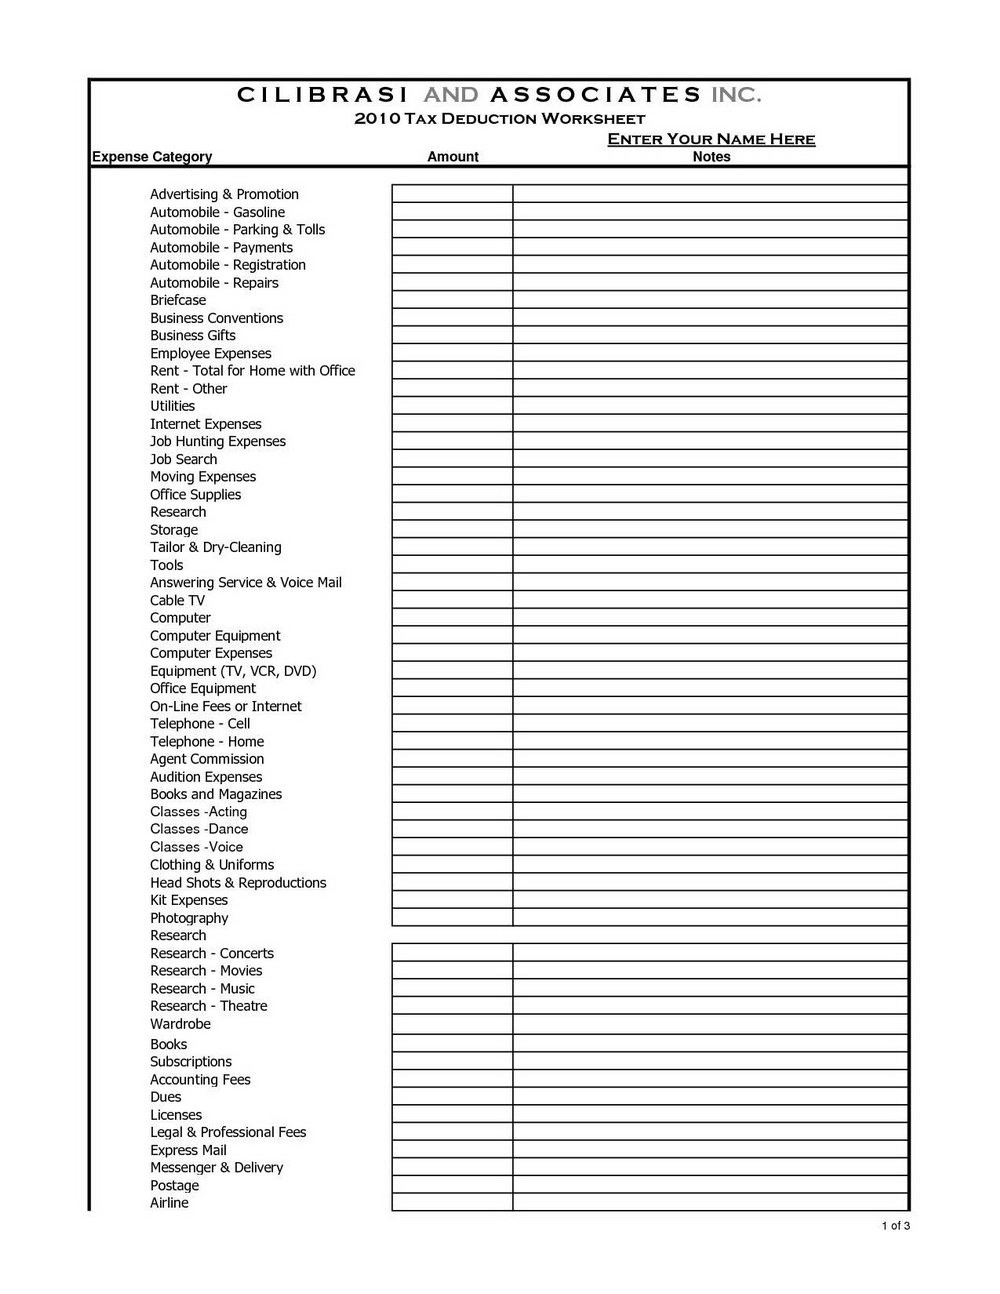 Tax Preparation Worksheet For Small Business  Universal Network